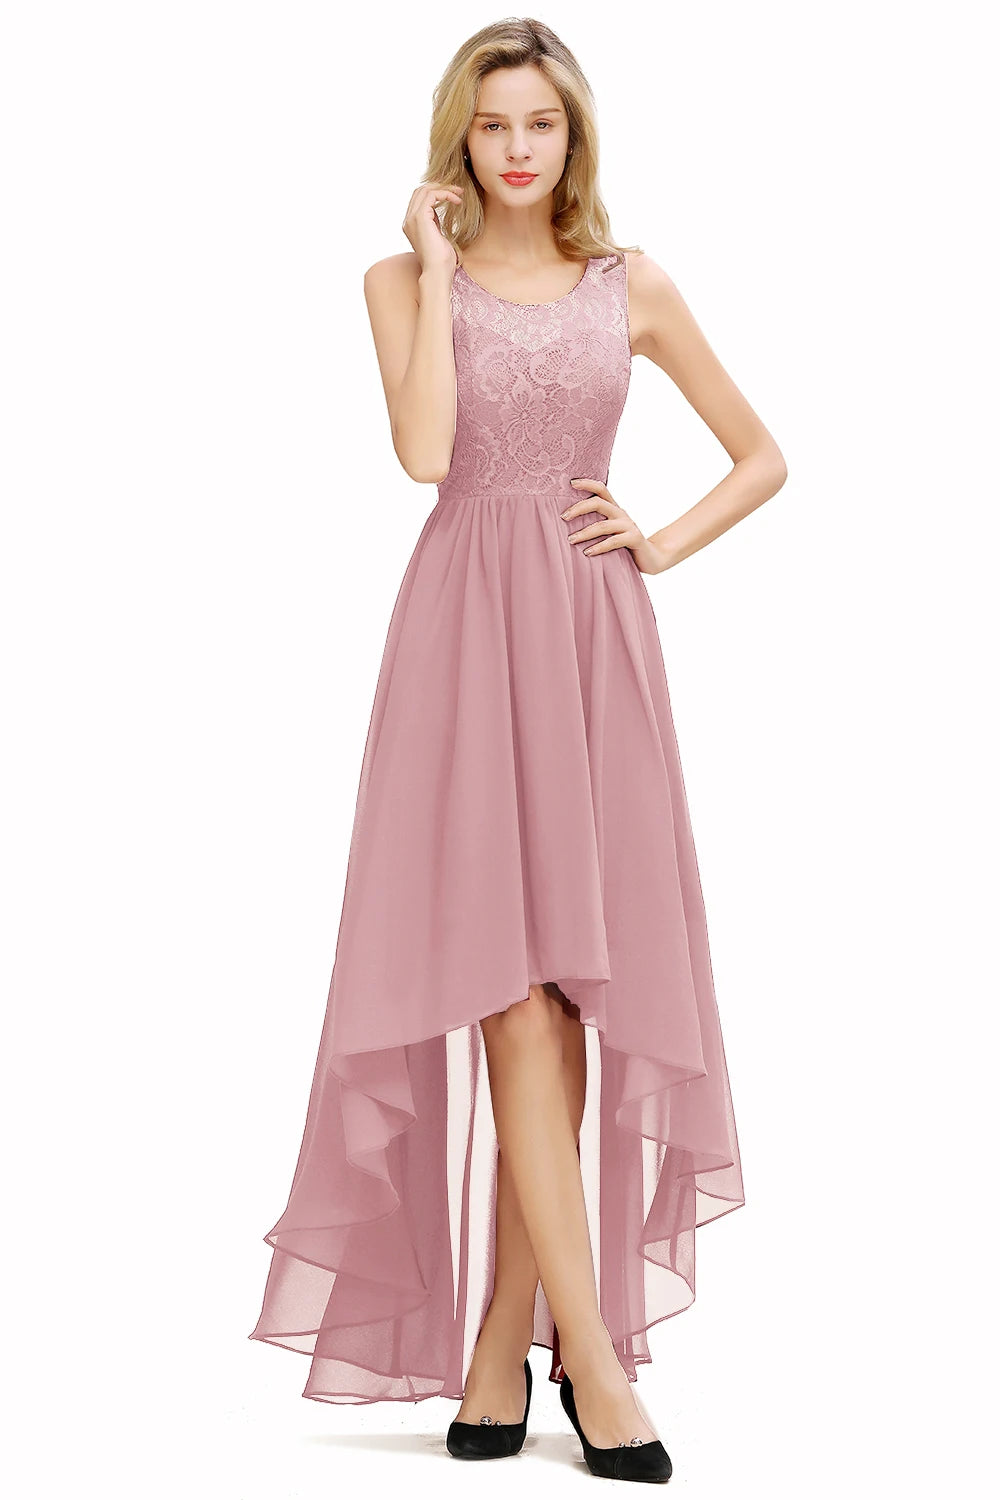 Pink Chiffon Long Bridesmaid Dresses High Low Wedding Guest Party Gown Sleeveless Lace Flower vestido madrinha